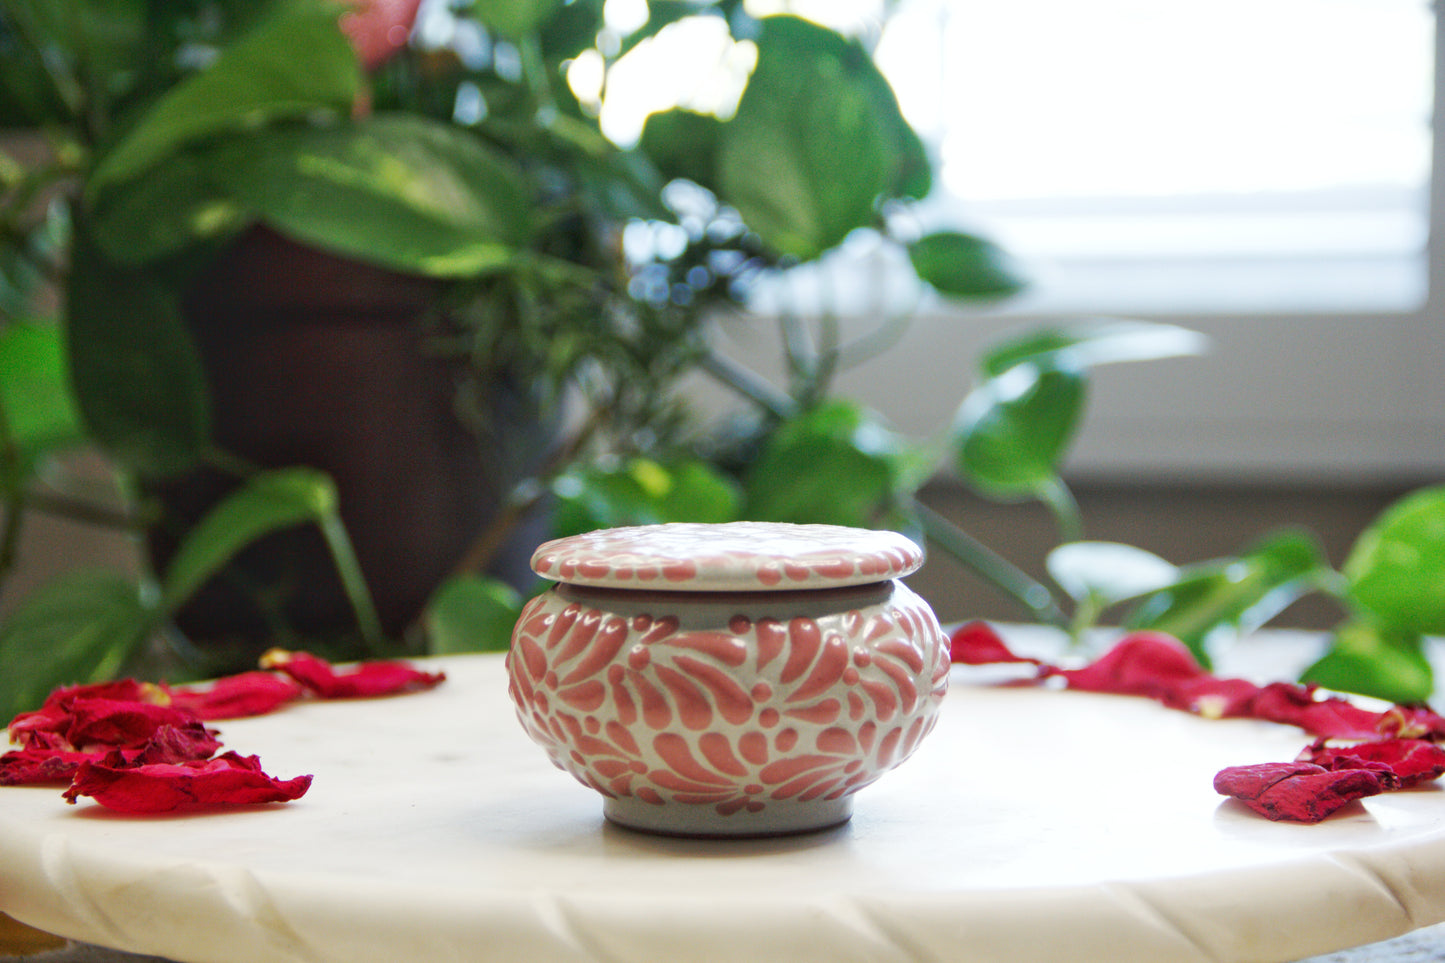 Artisanal candle in a beautiful light grey talavera cup with a lid. Handmade white strokes design. Handcrafted by Artisan in Puebla, Mexico. 100% All Natural Soy Candle. Reuse the talavera as home decor or storage.